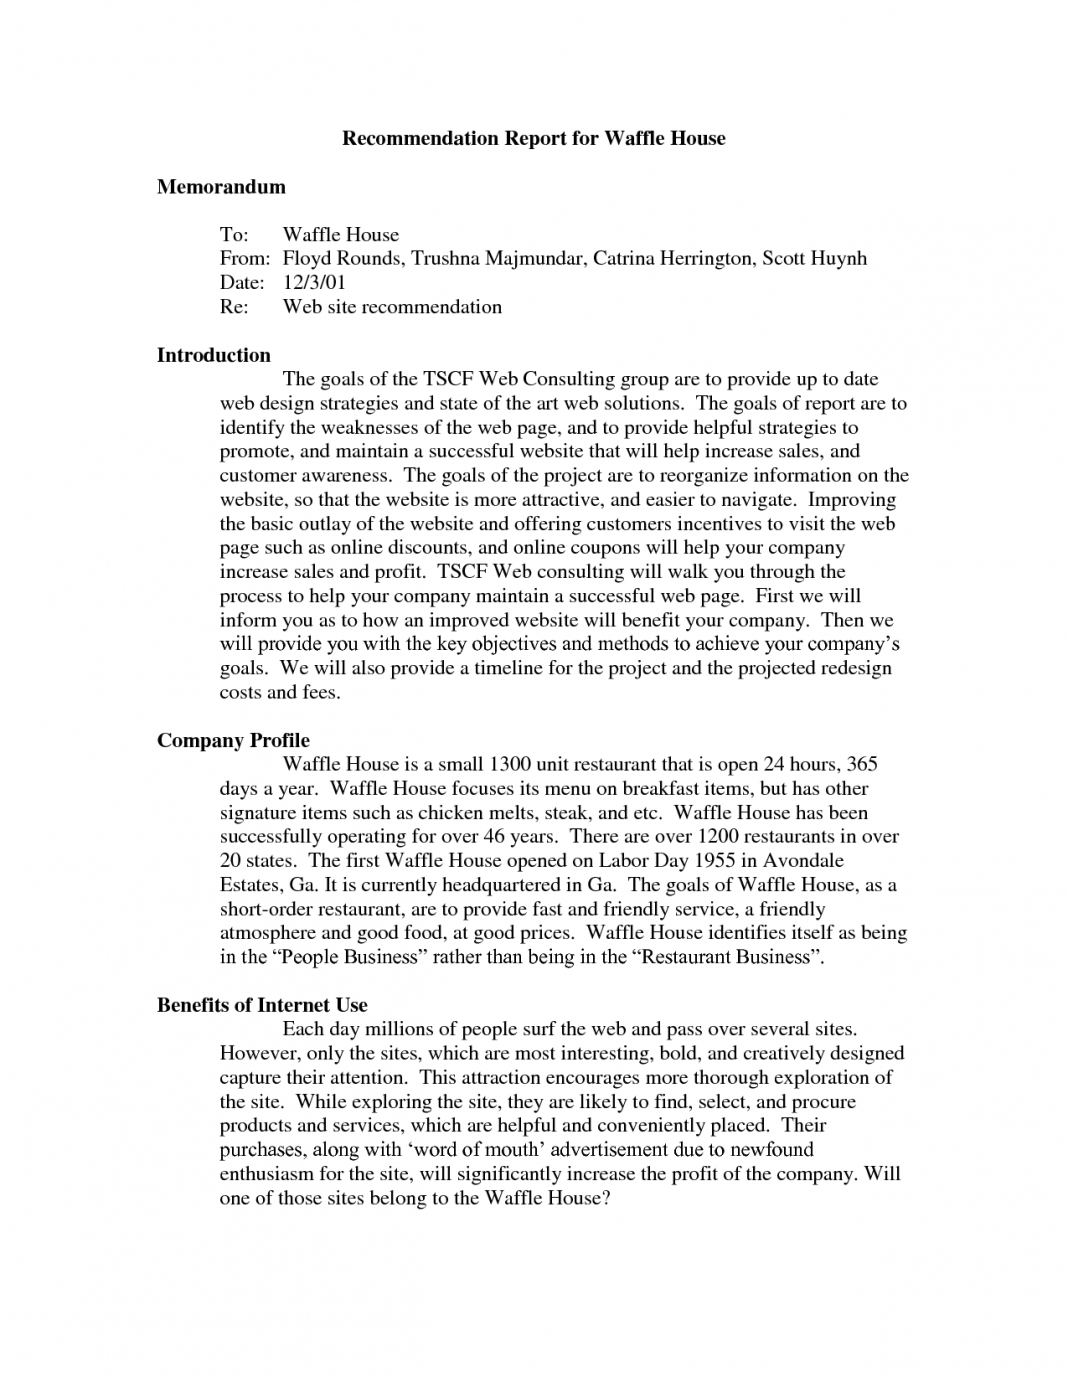 Recommendation Report Example Examples Internal Memo Sample Throughout Recommendation Report Template